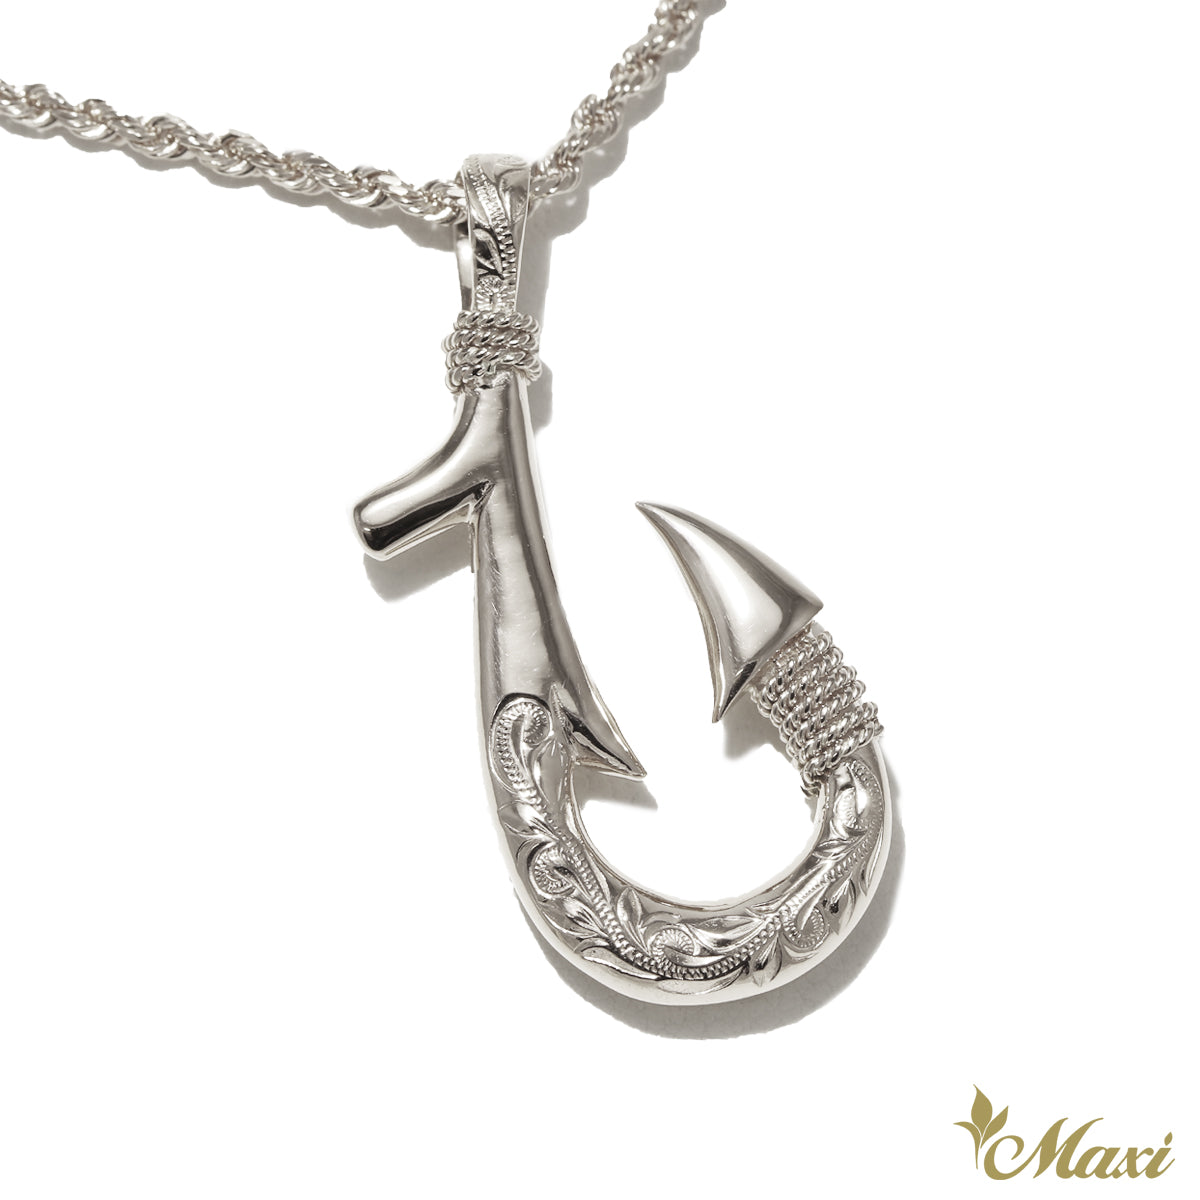 Retro Fishhook Stainless Steel Necklace - Rock & Spark